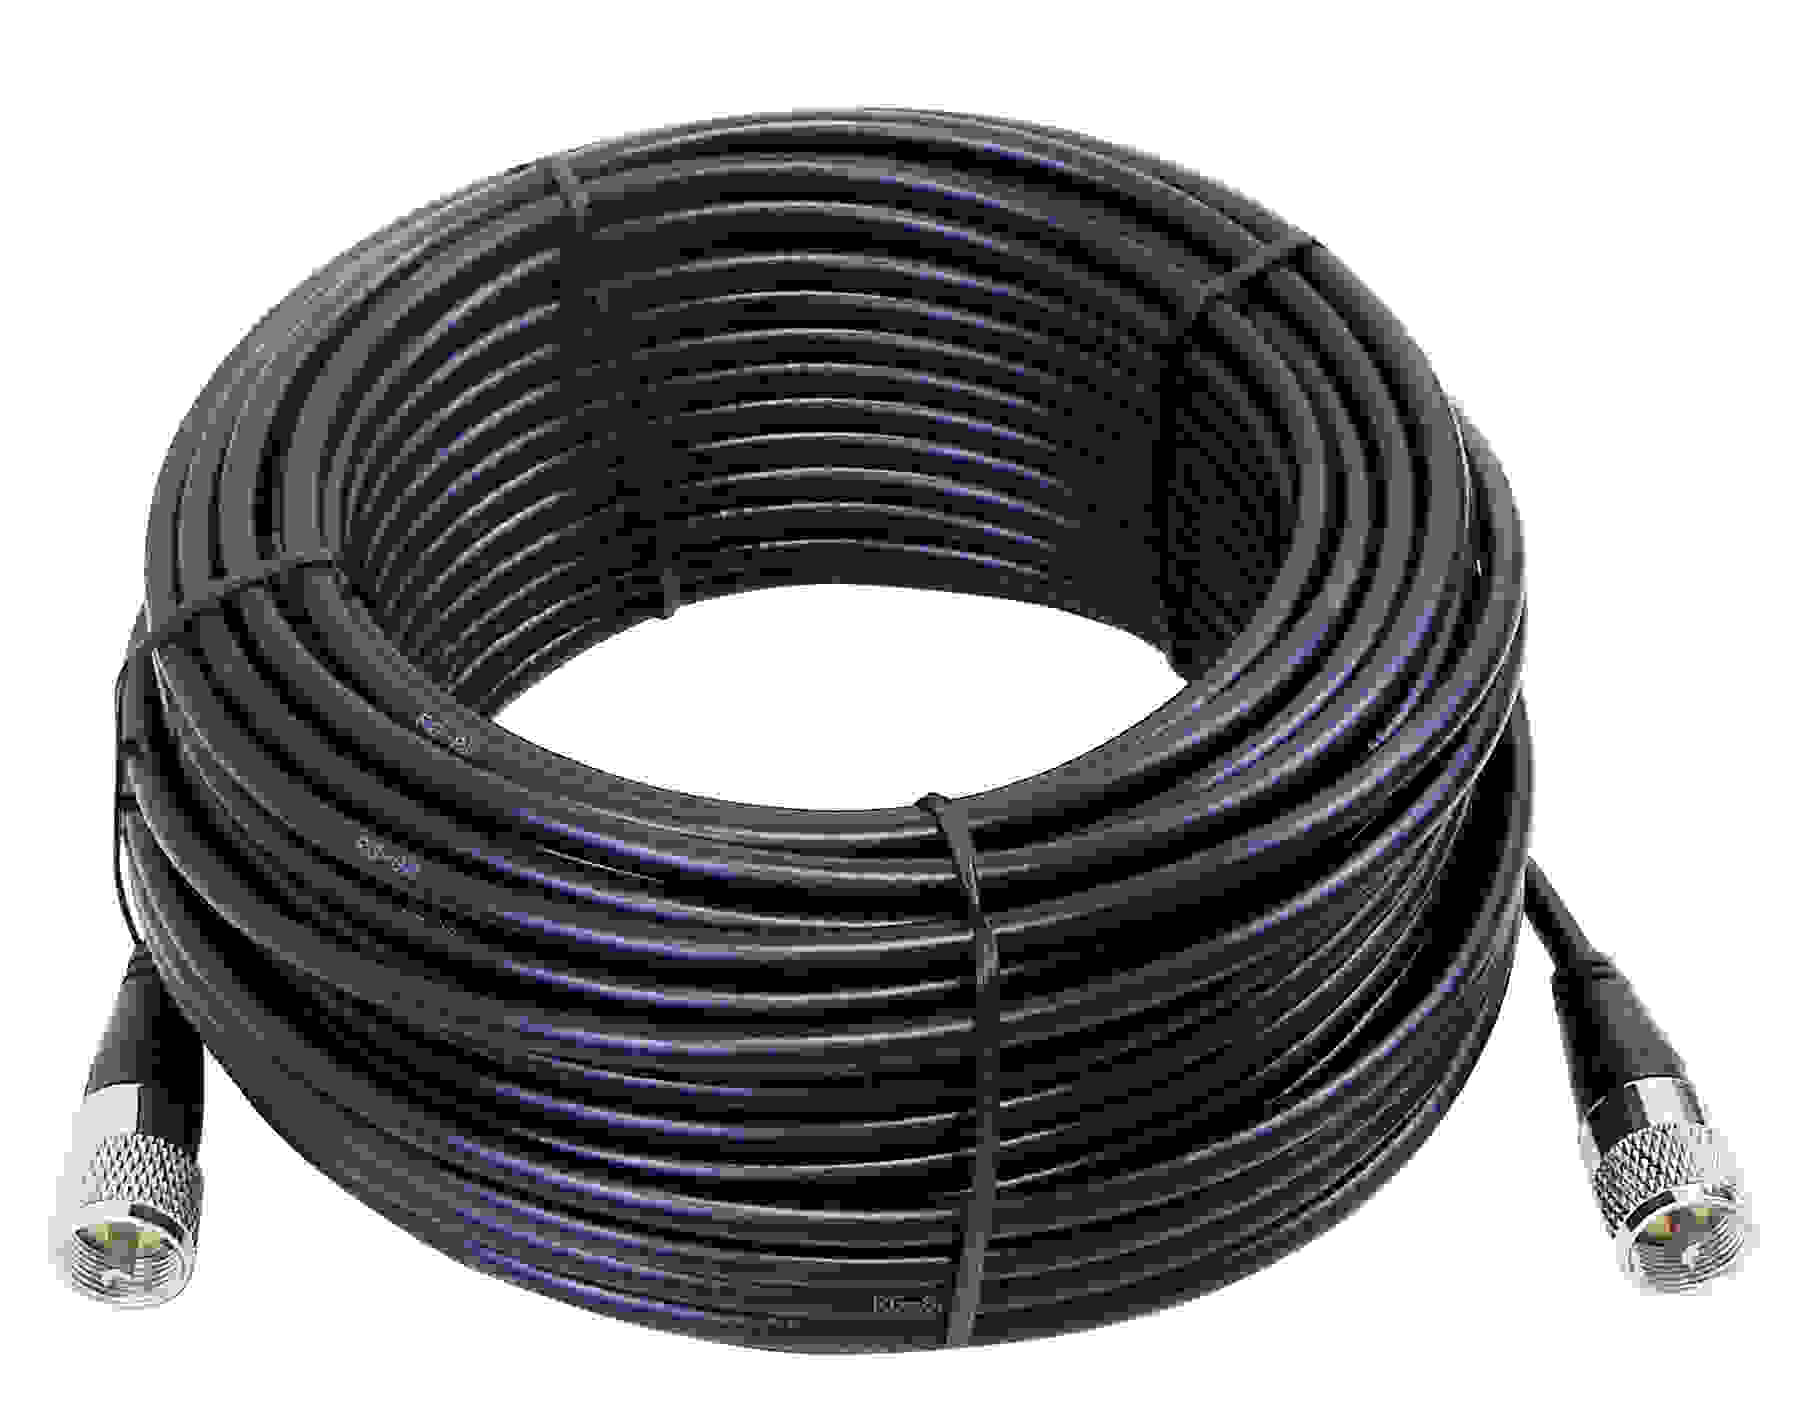 Kalibur 100 Foot Black Rg8X Coax Cable Assembly With Molded Pl259 Connectors On Each End